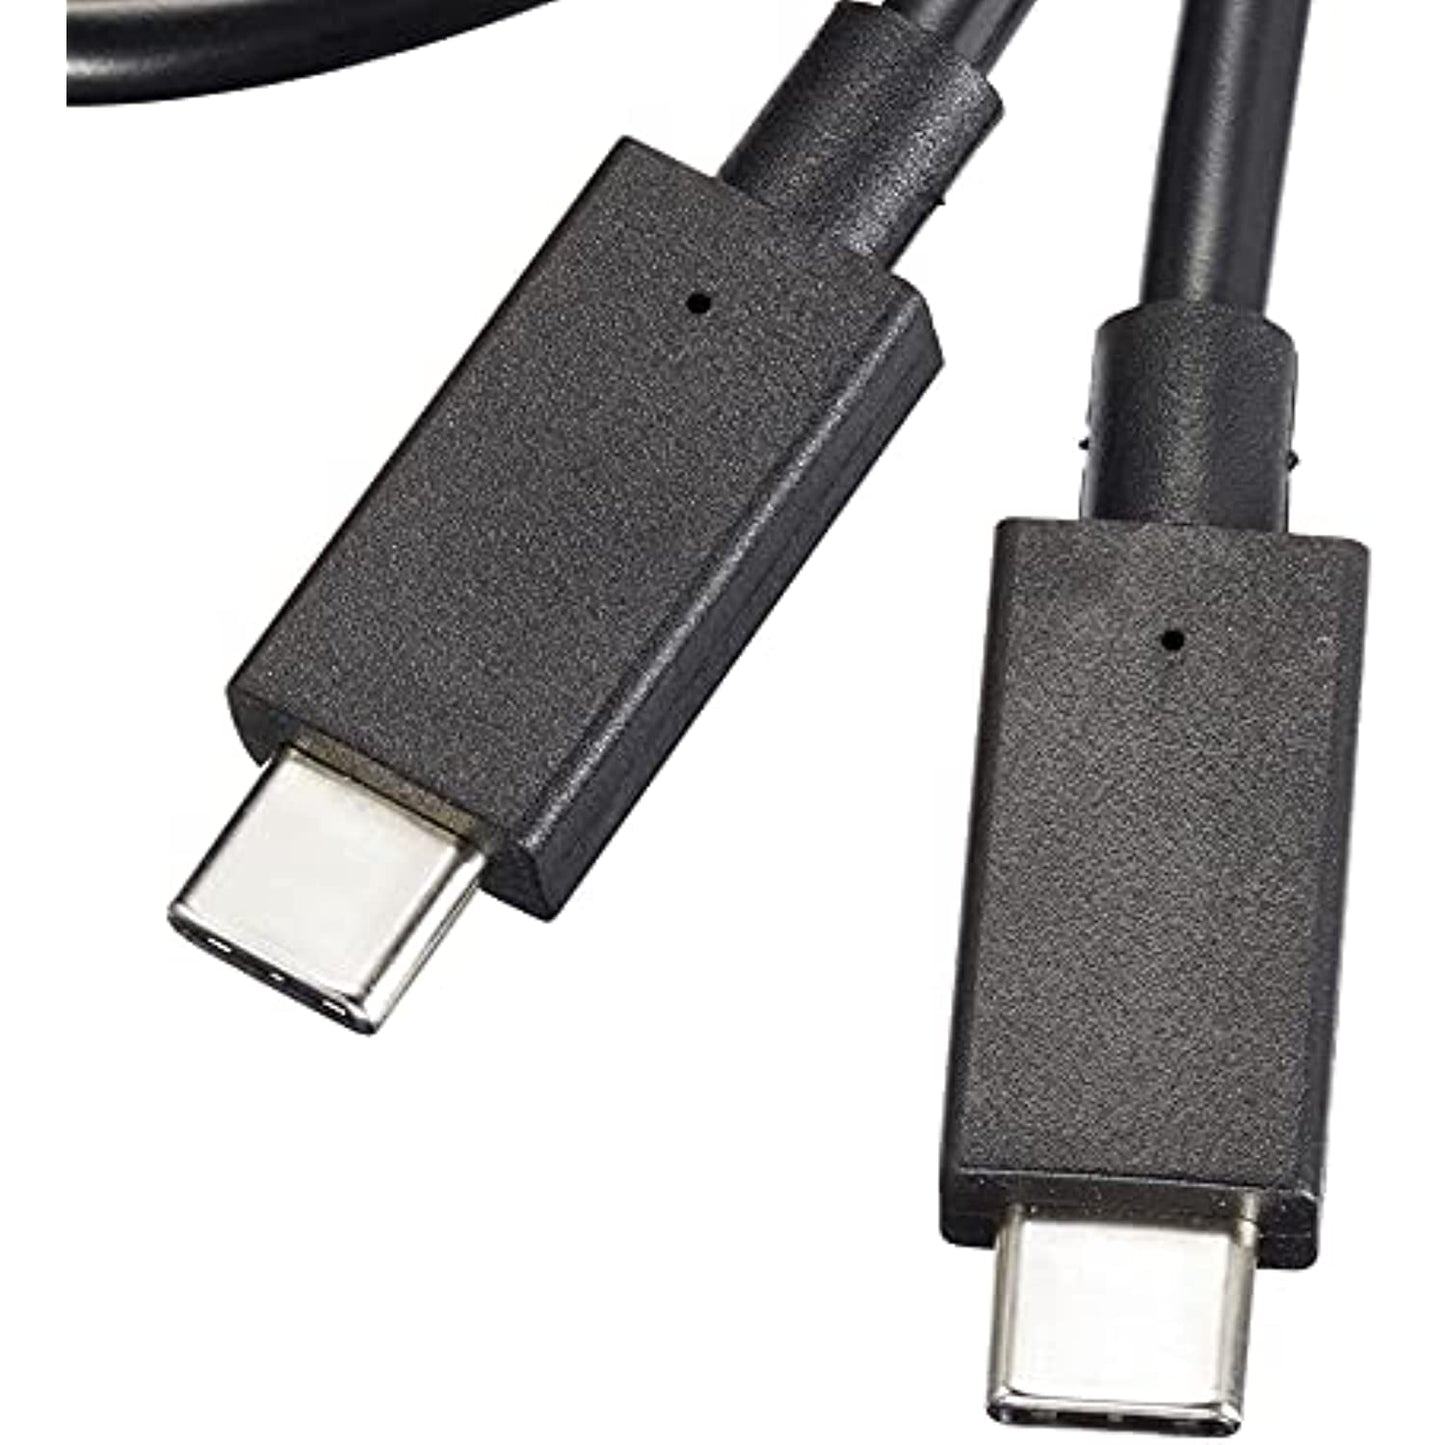 Pioneer CD-CCU500 USB Type-C Interface Cable Lighting Accessories & Parts, Black